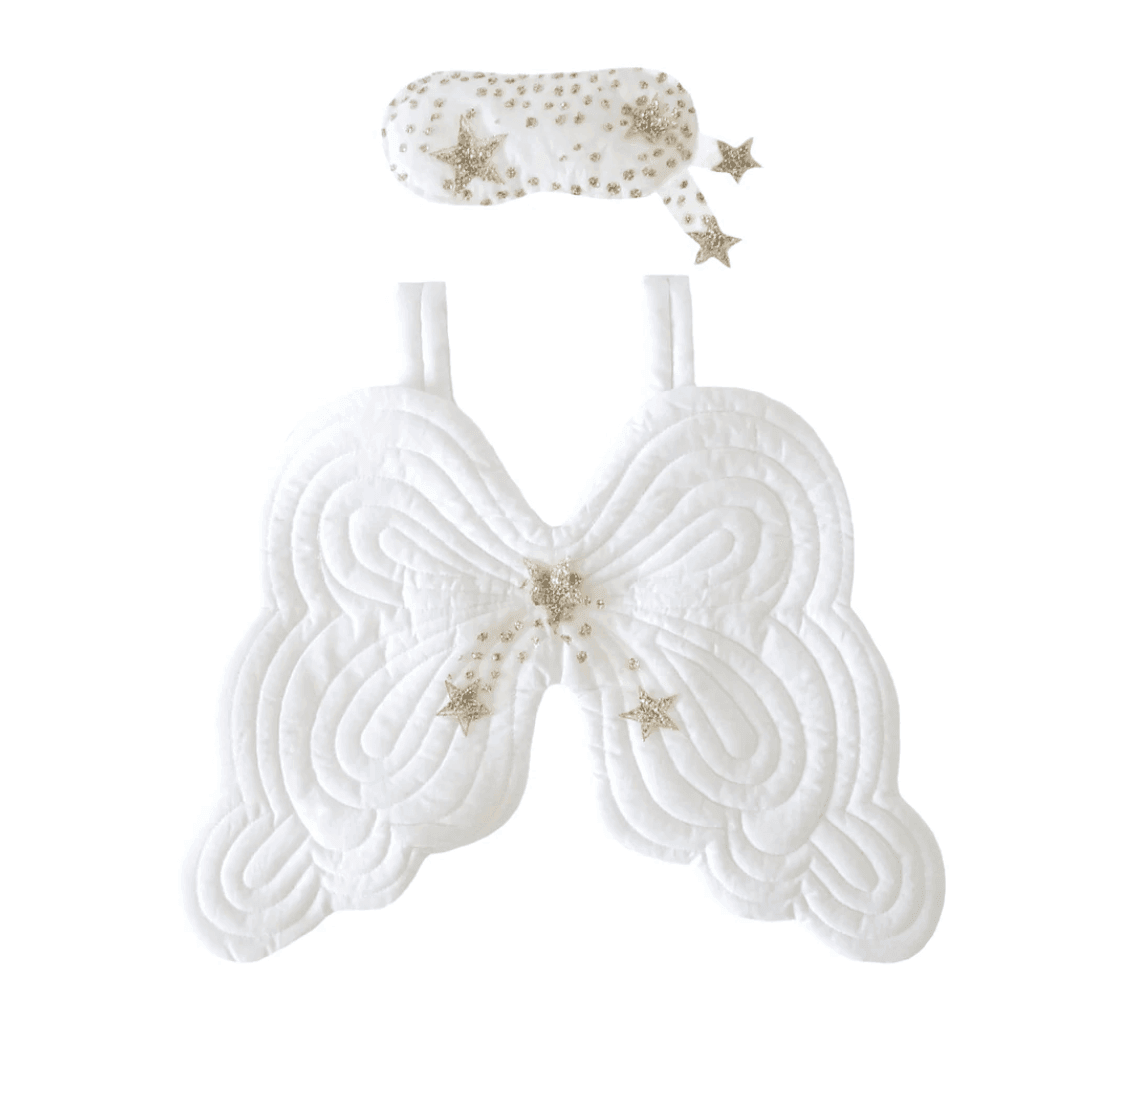 The Curated Parcel - Starry Masks and Heirloom Angel Wing Set 